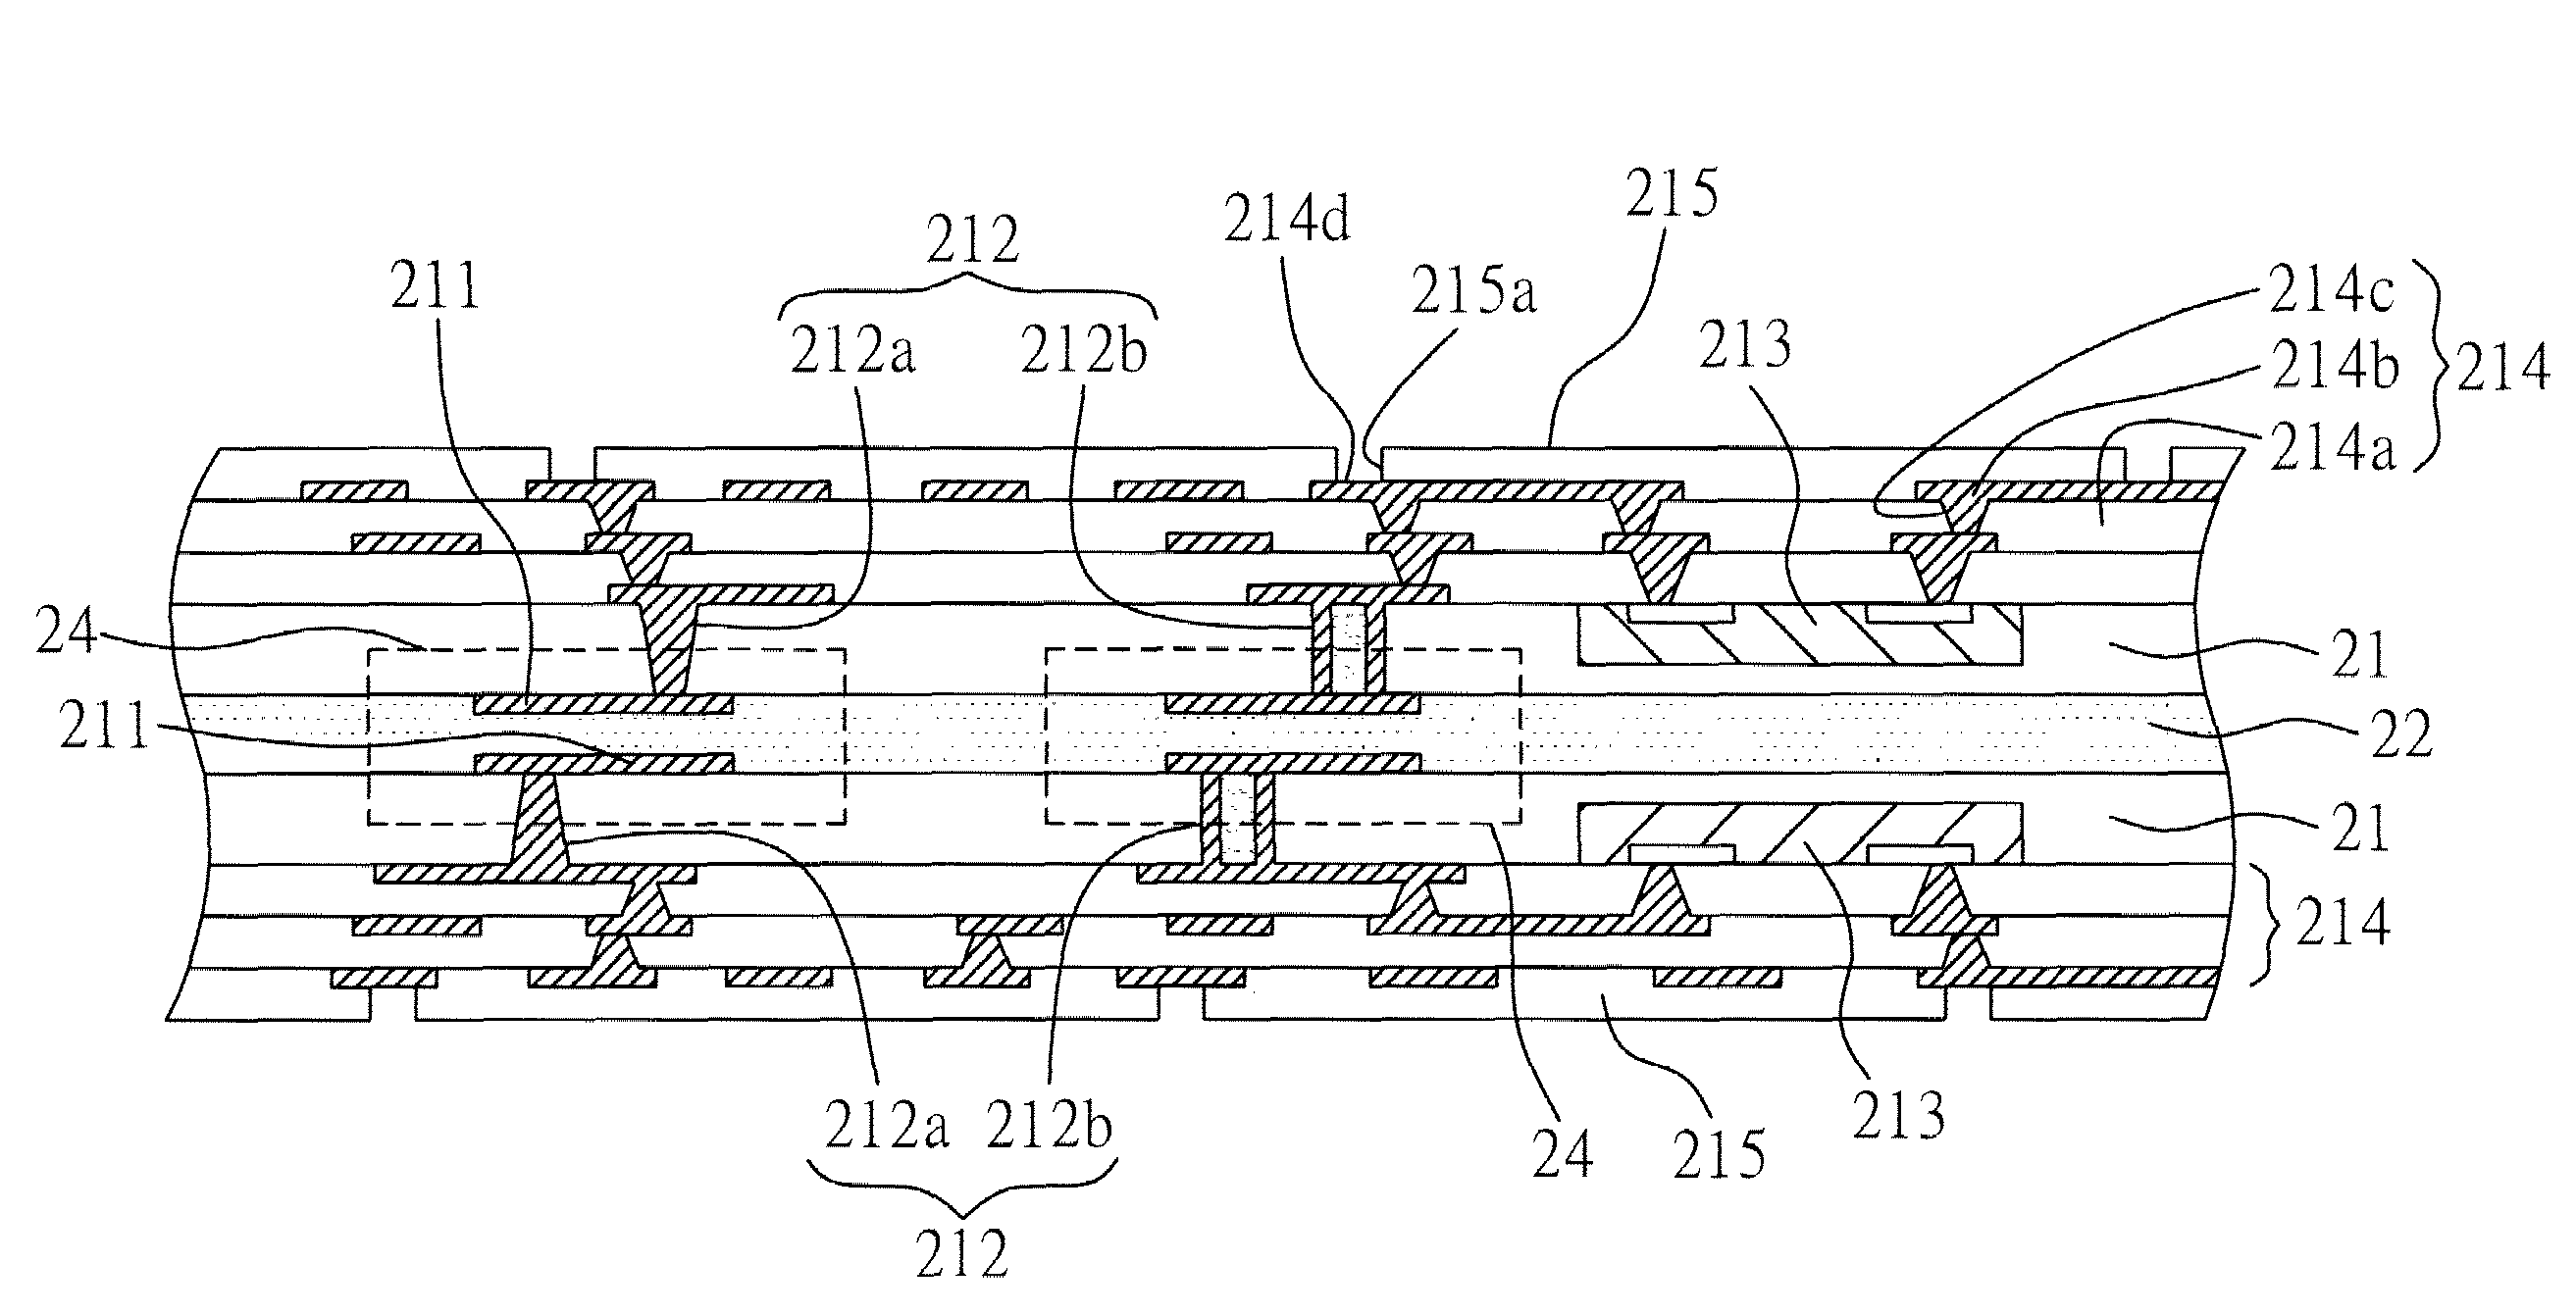 Circuit board structure having capacitor array and embedded electronic component and method for fabricating the same